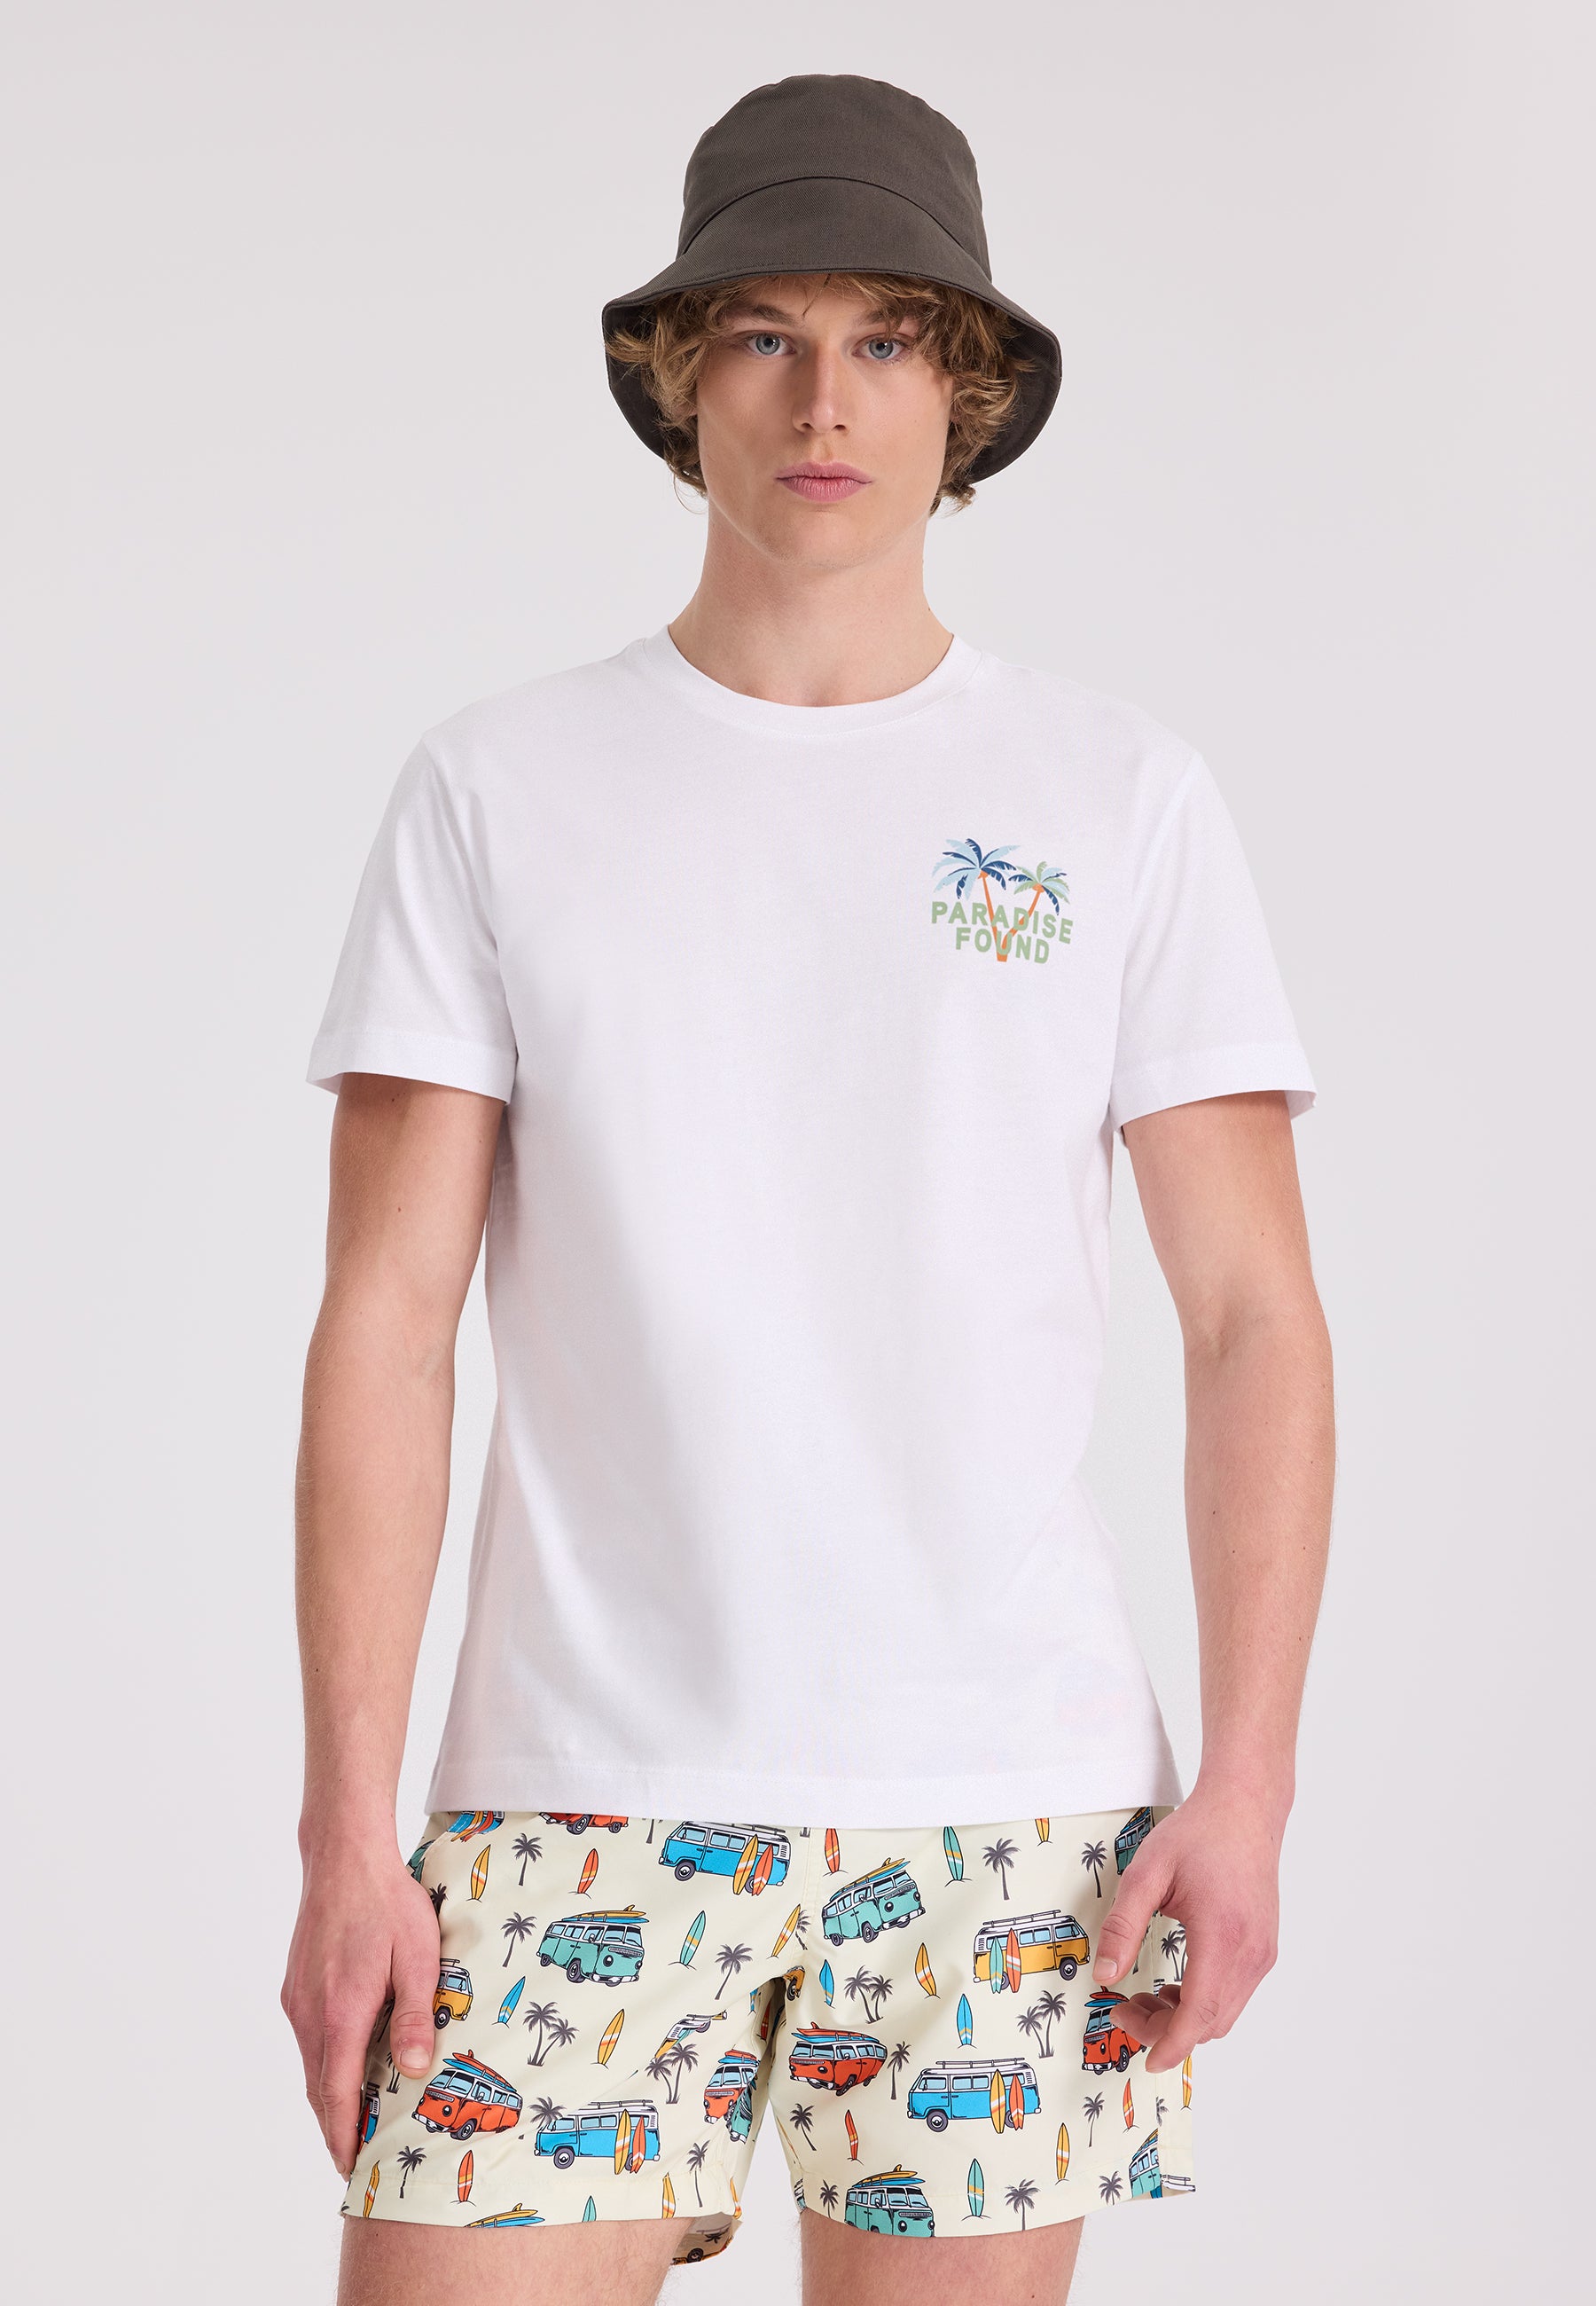 WMBACK PARADISE TEE in White